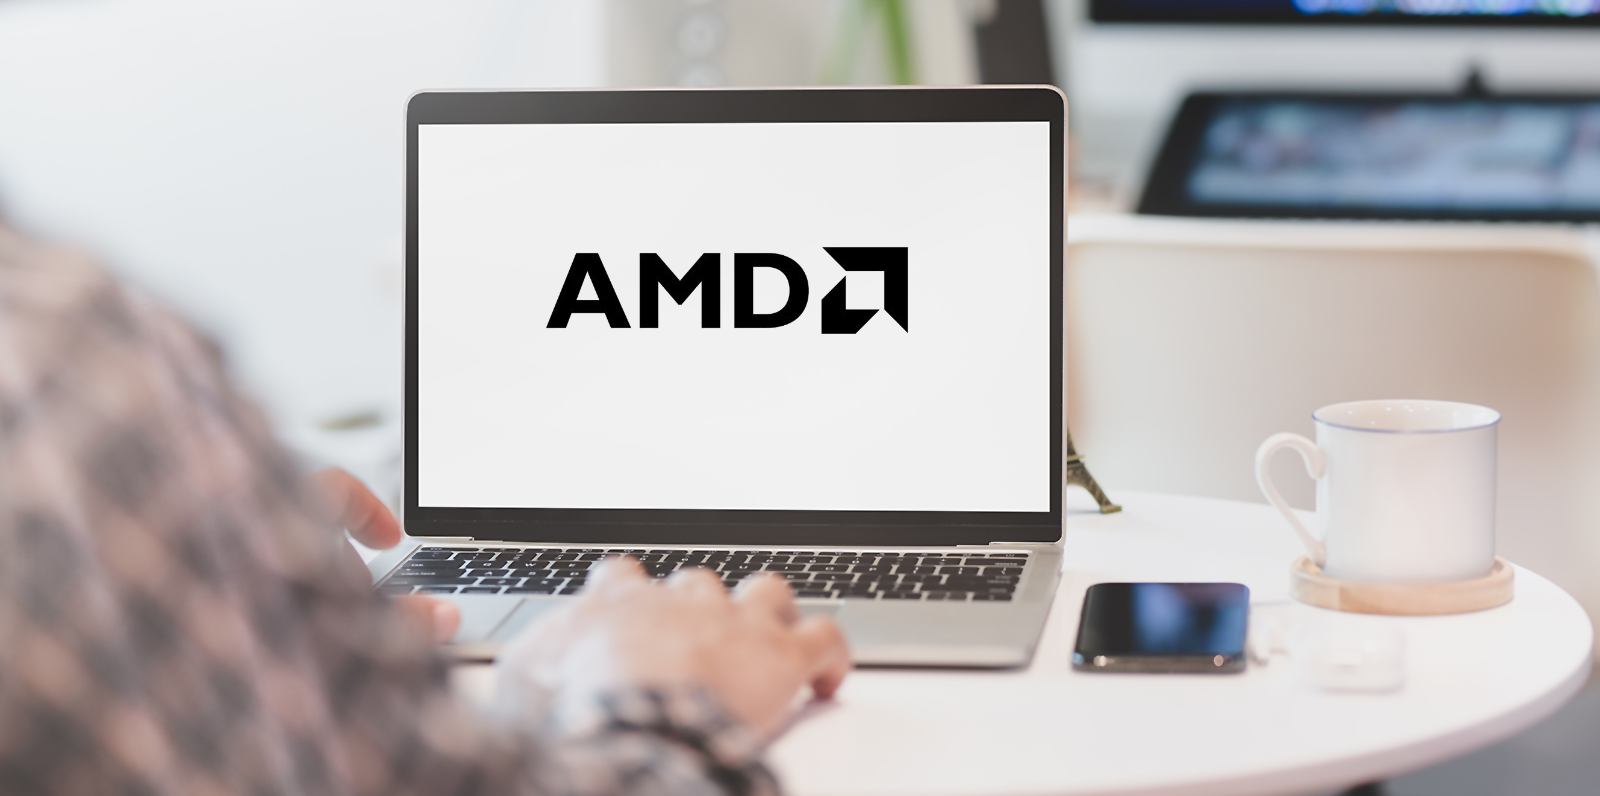 AMD Radeon Pro 5600M Mobile GPU Now Available for 16-inch MacBook Users